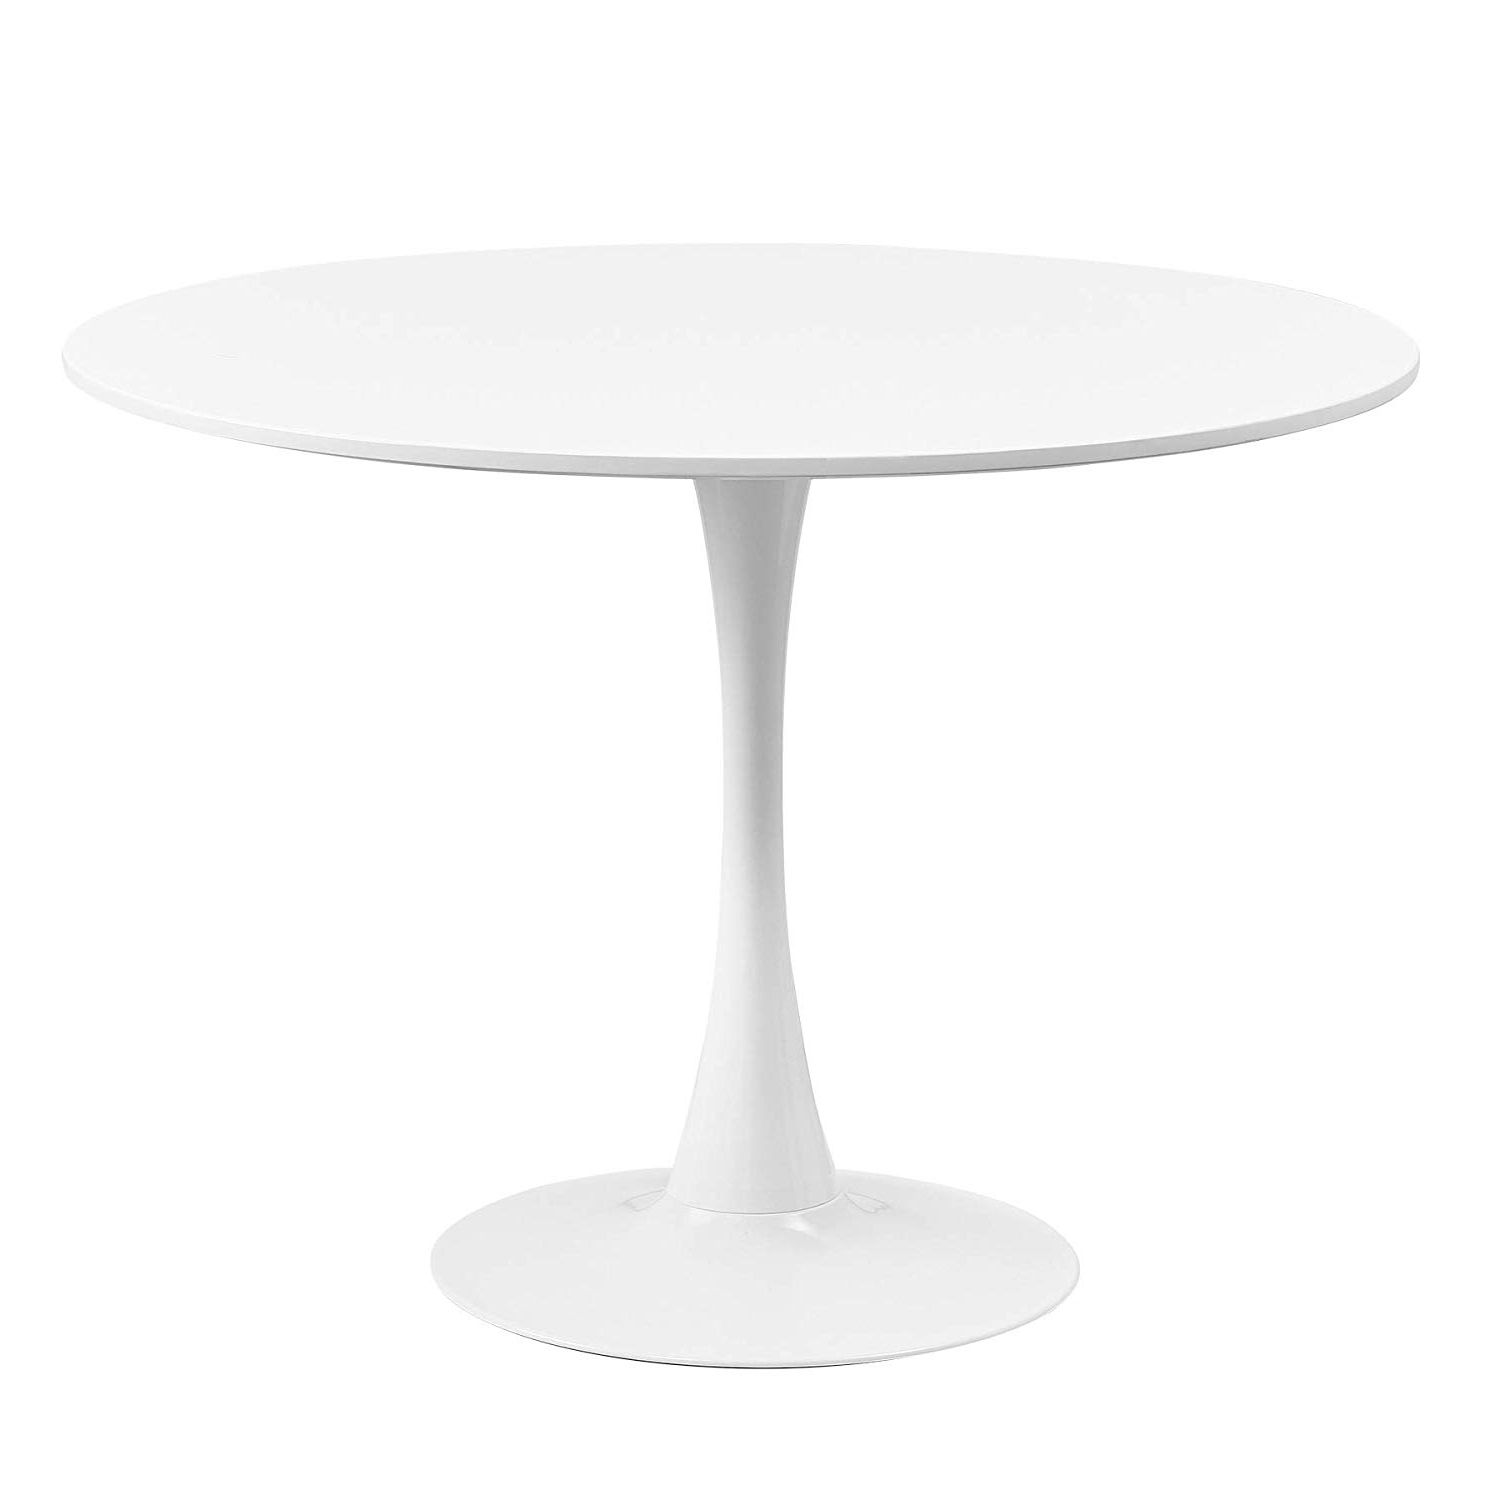 Newest Tonvision White Dining Table 29" Circular Table With Metal Base Round  Pedestal Table Solid Retro Inspired Design For 2 4 Seaters Living Room  Kitchen Pertaining To Dawson Pedestal Dining Tables (View 24 of 25)